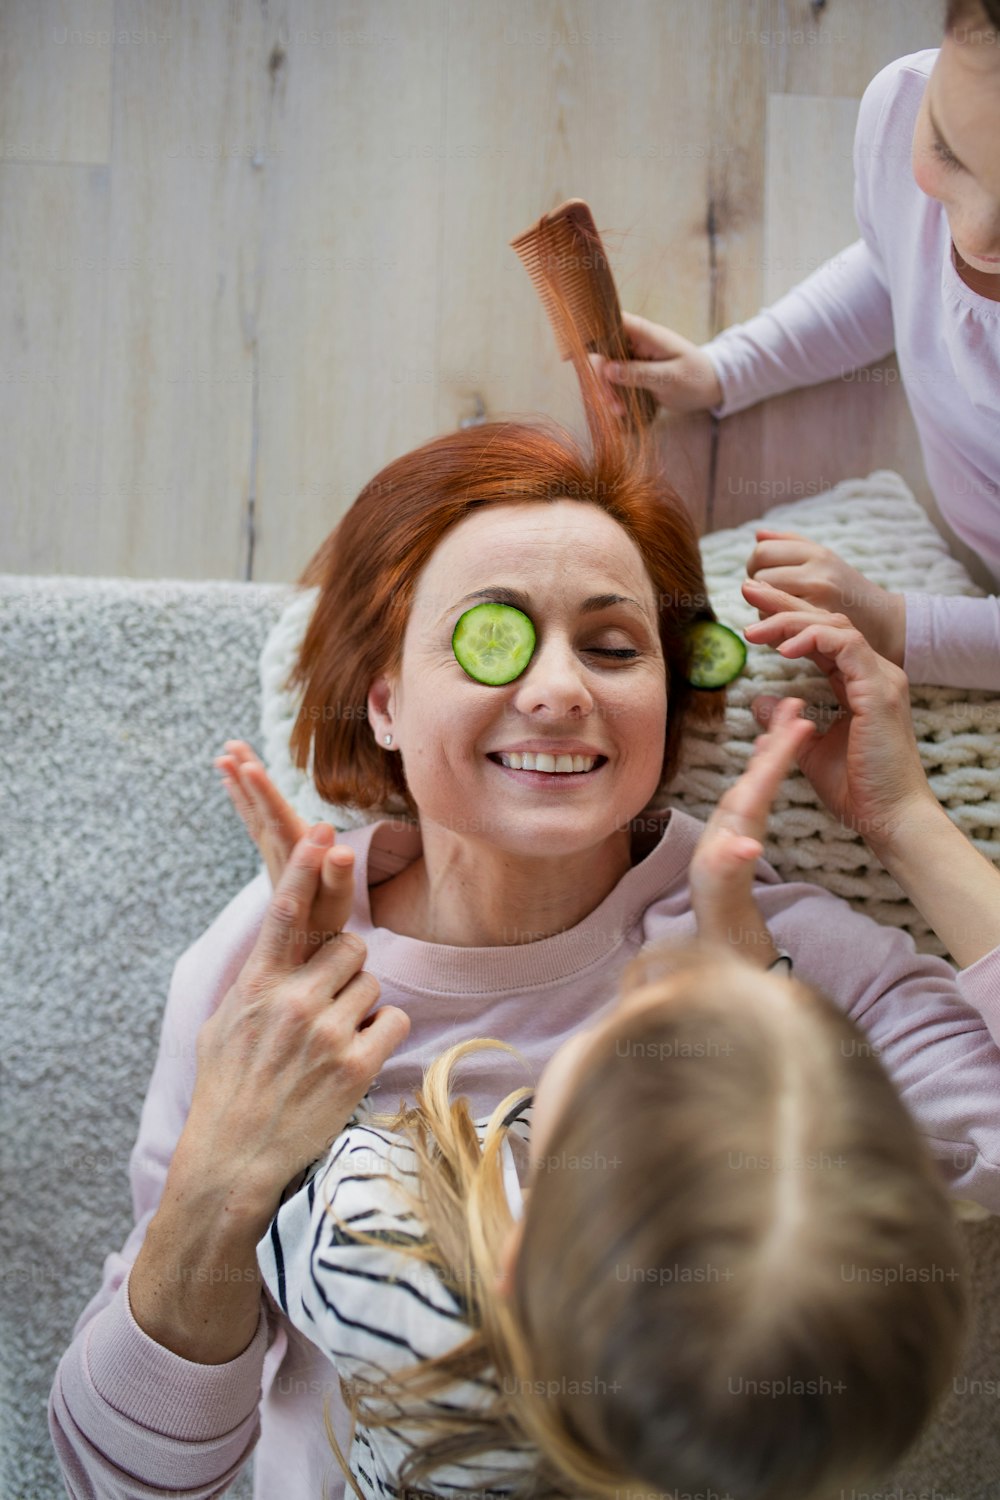 Two little girls putting a cucumber on their mother's face and combing her hair at home.